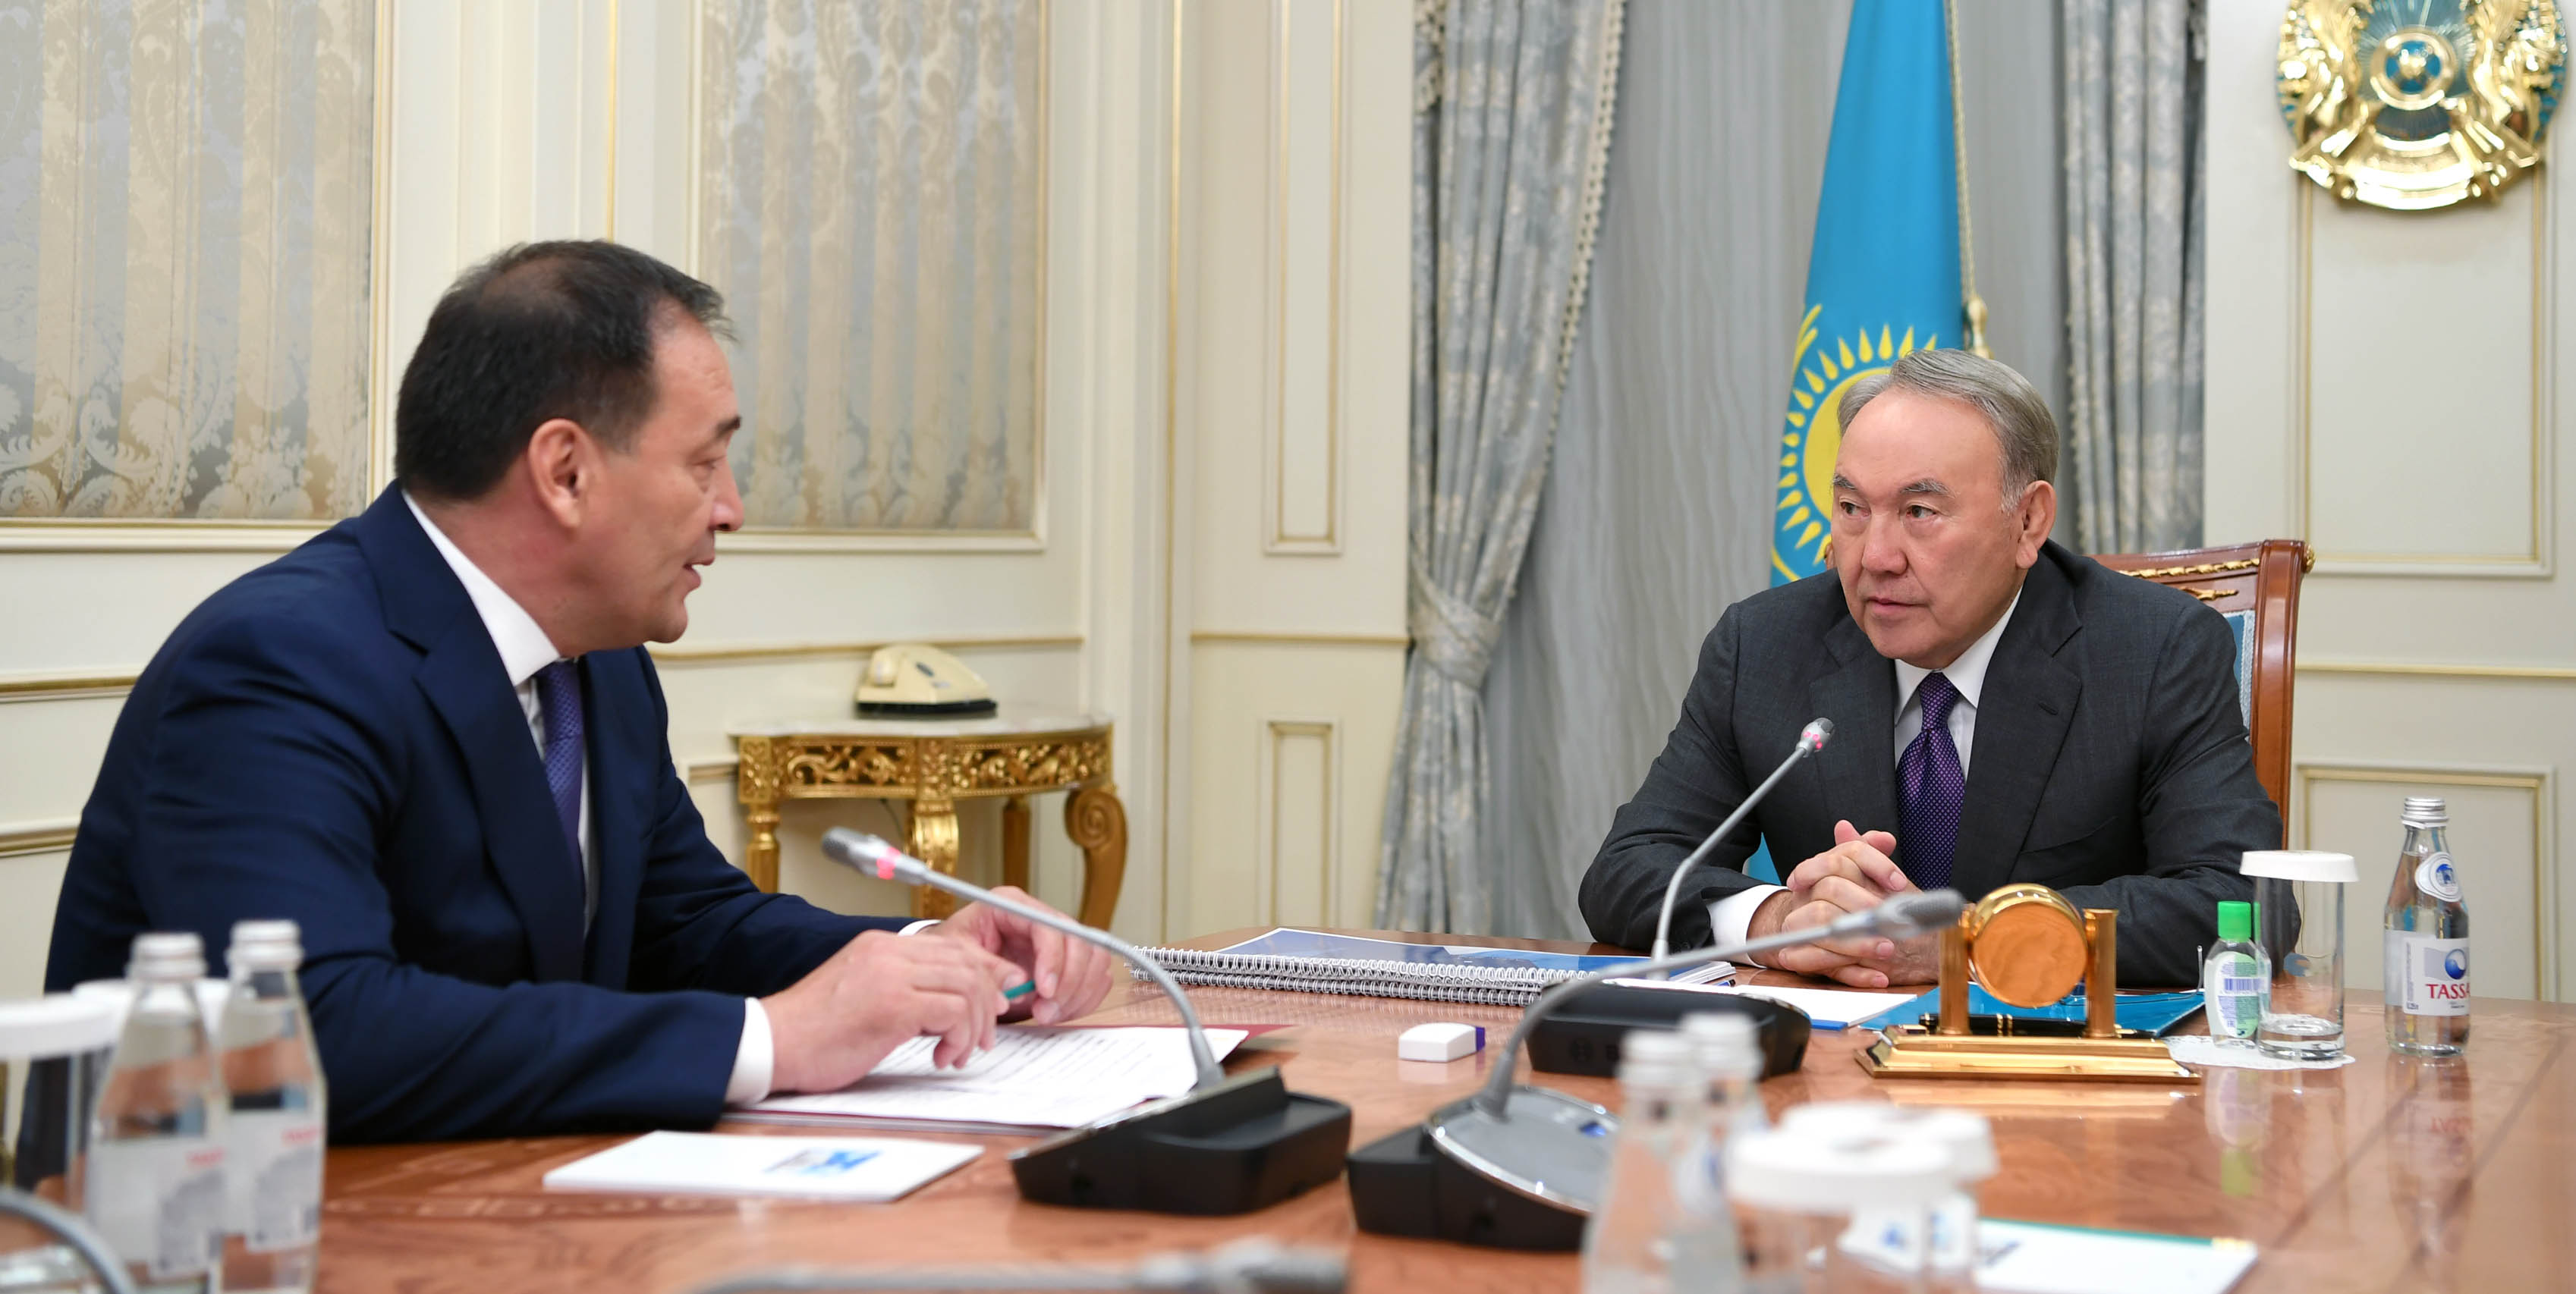 The Head of State holds a meeting with Akim of Mangistau region